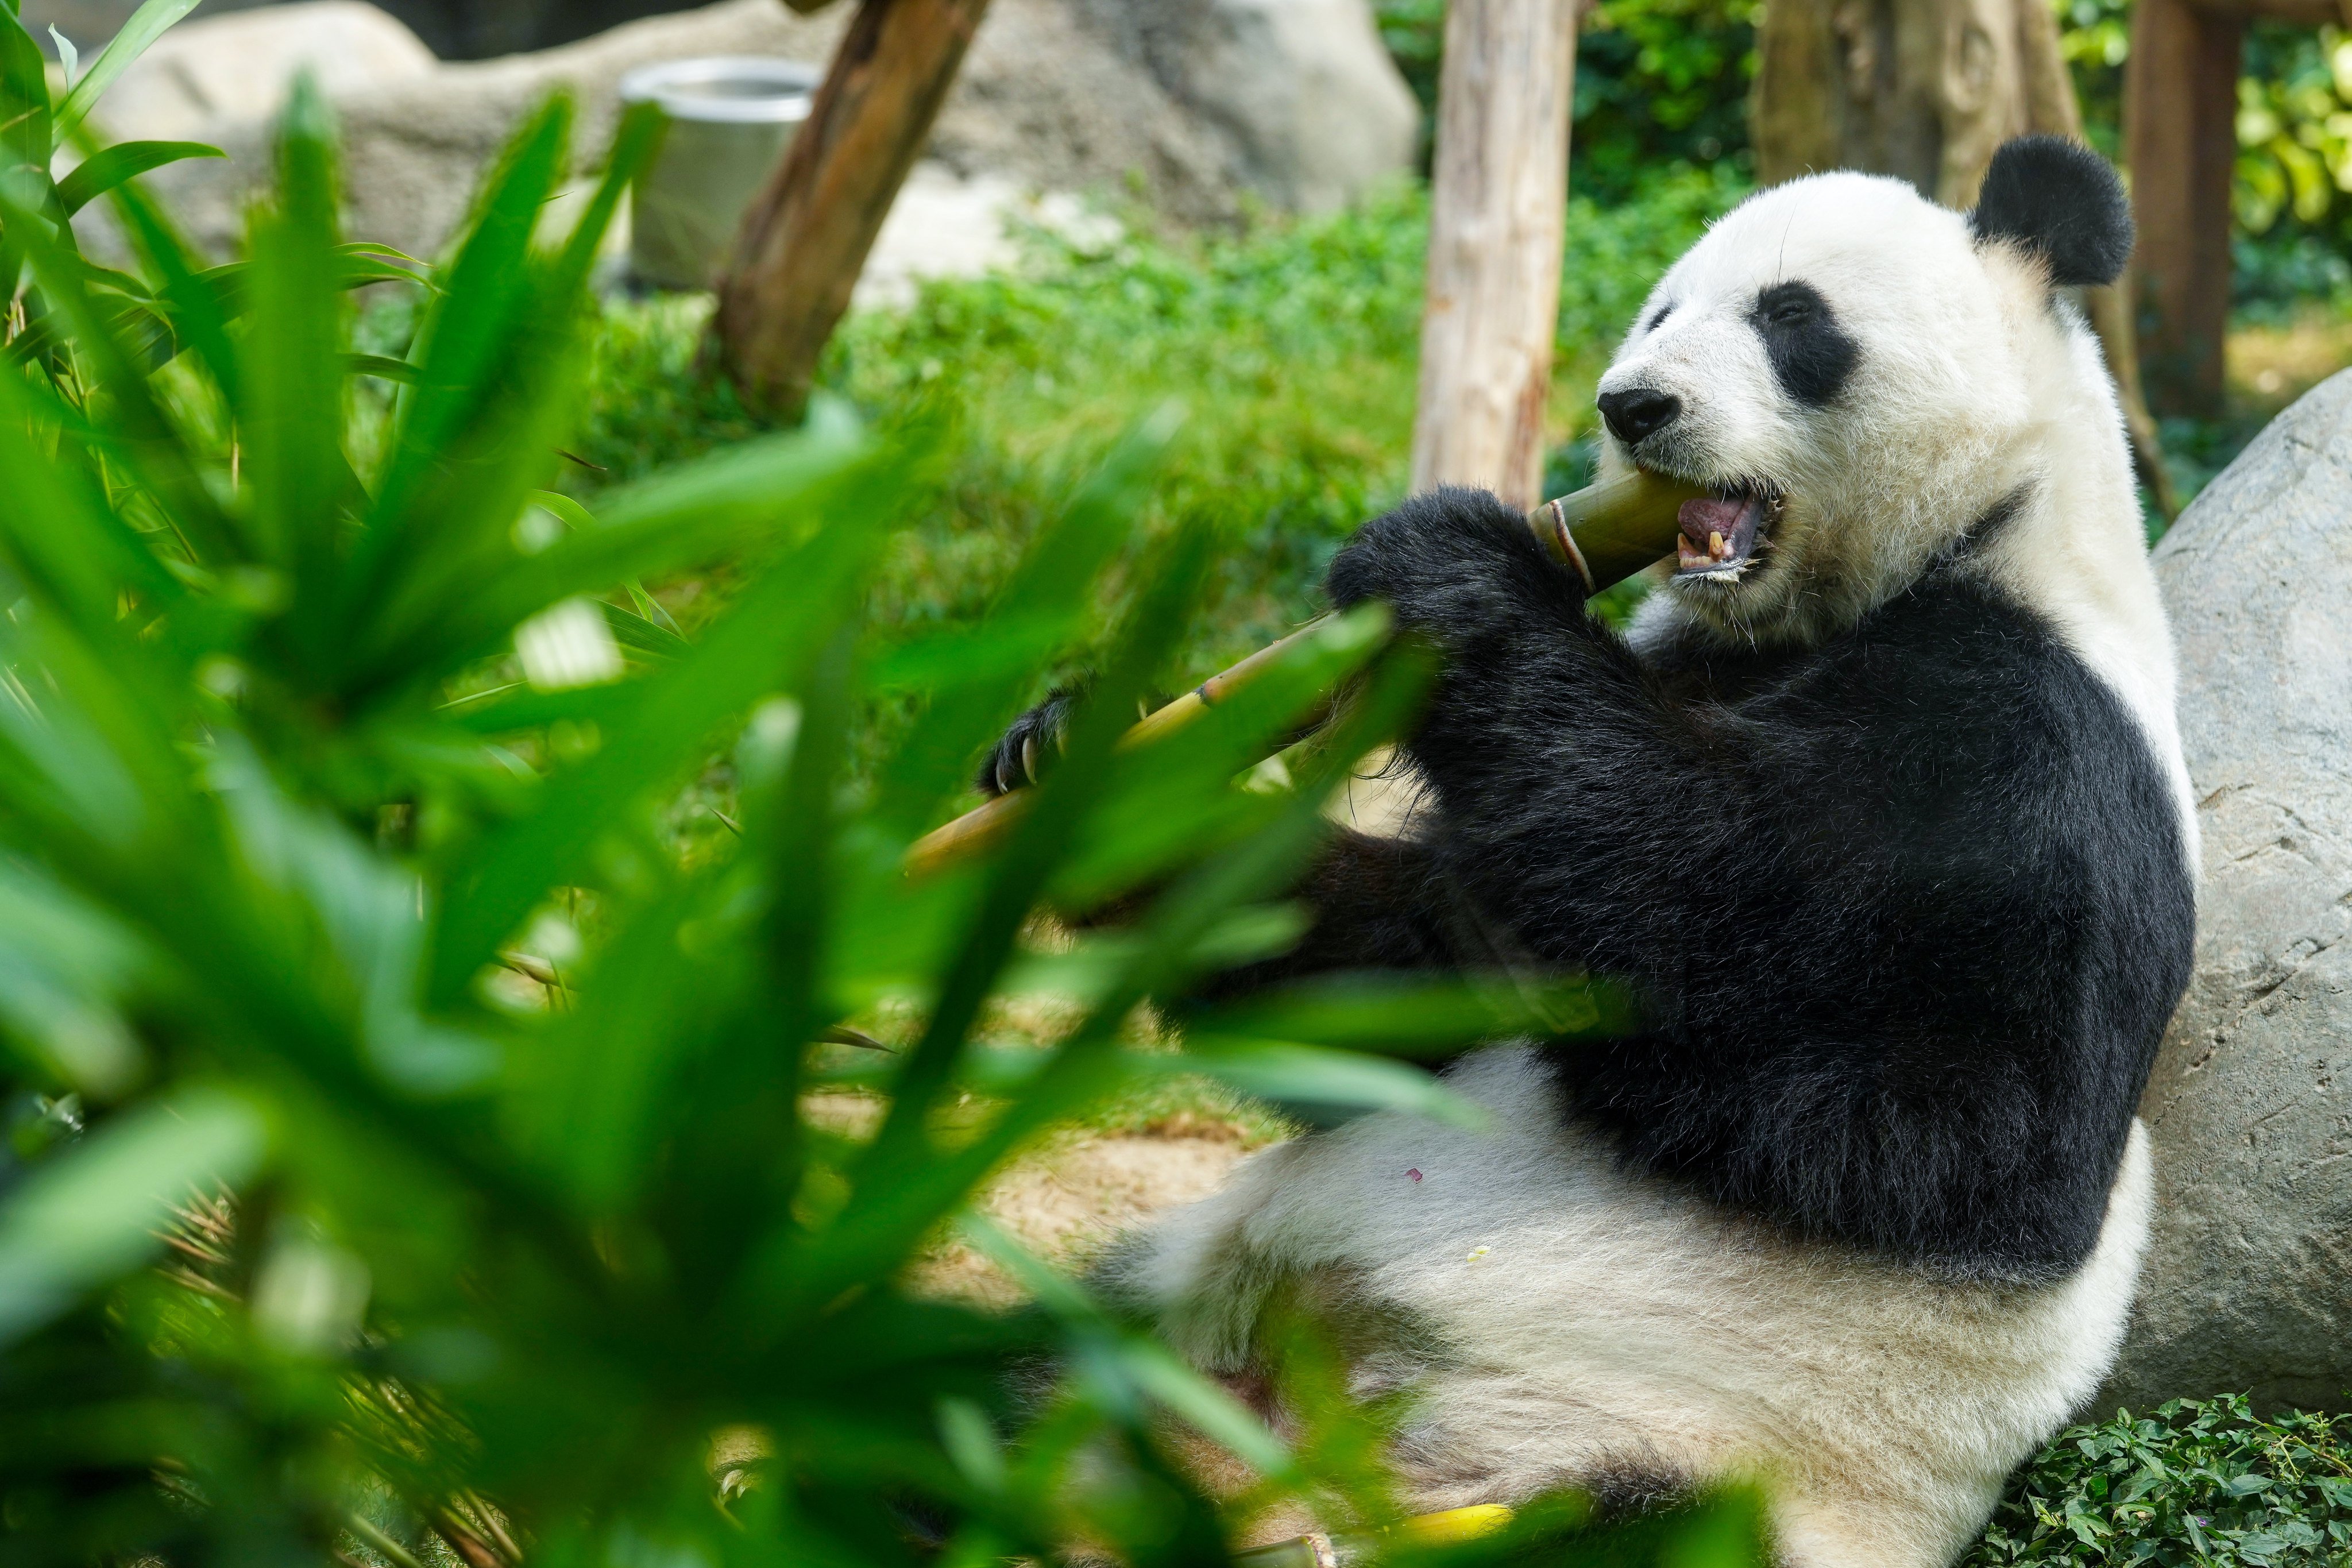 Ying Ying, one of the giant pandas already living at Ocean Park. Photo: Elson Li